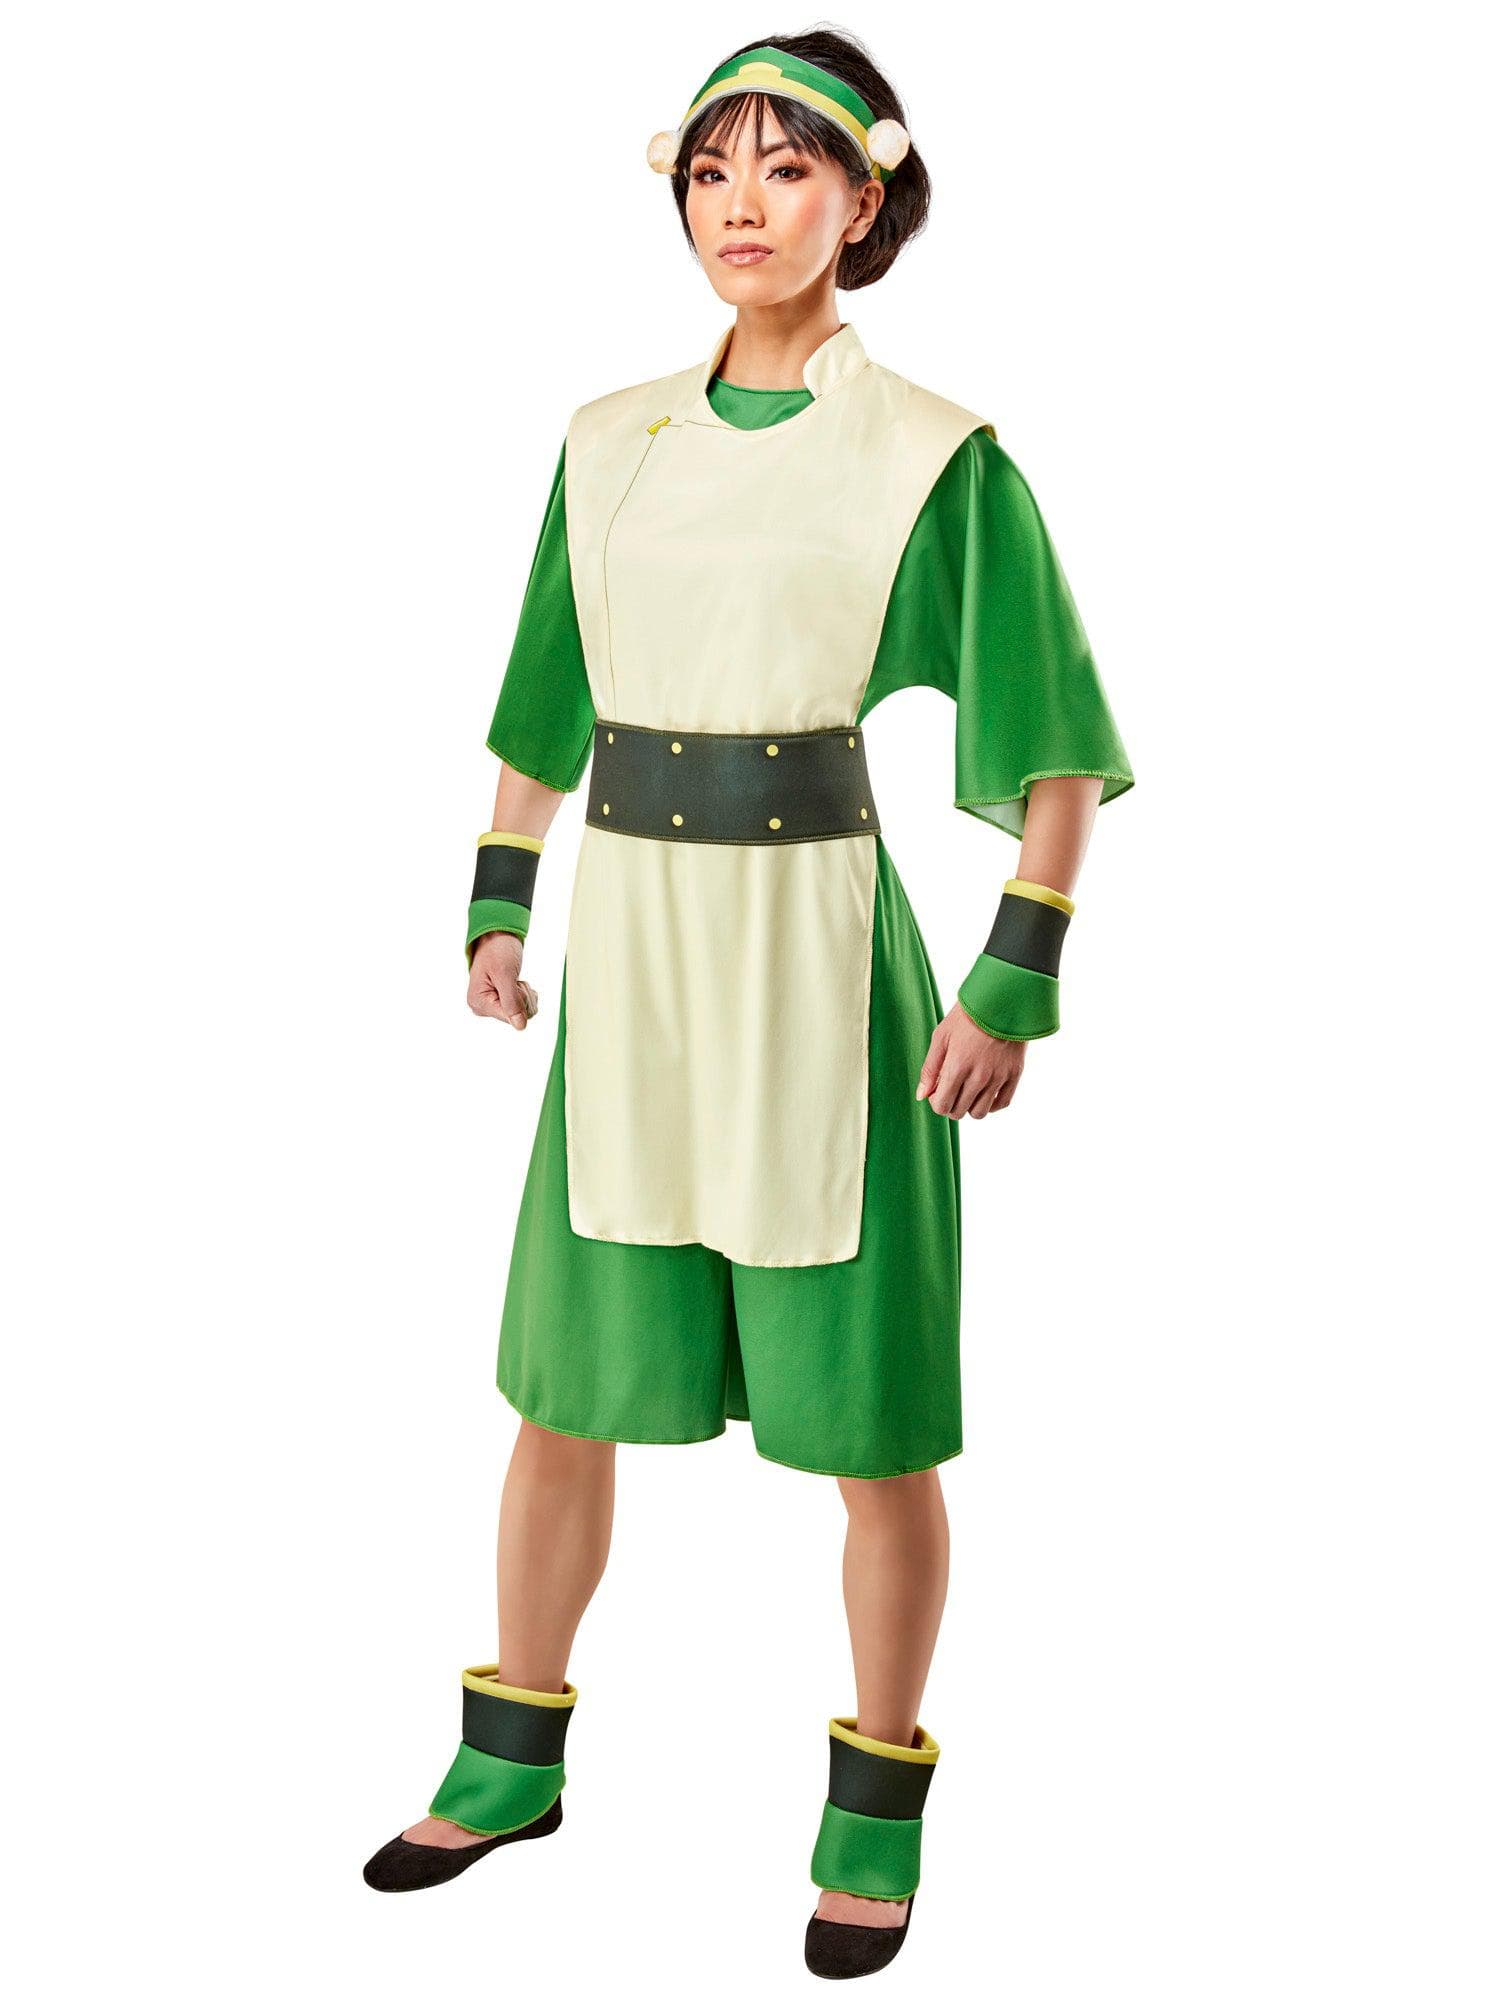 Girls' Avatar: The Last Airbender Toph Beifong Costume - costumes.com